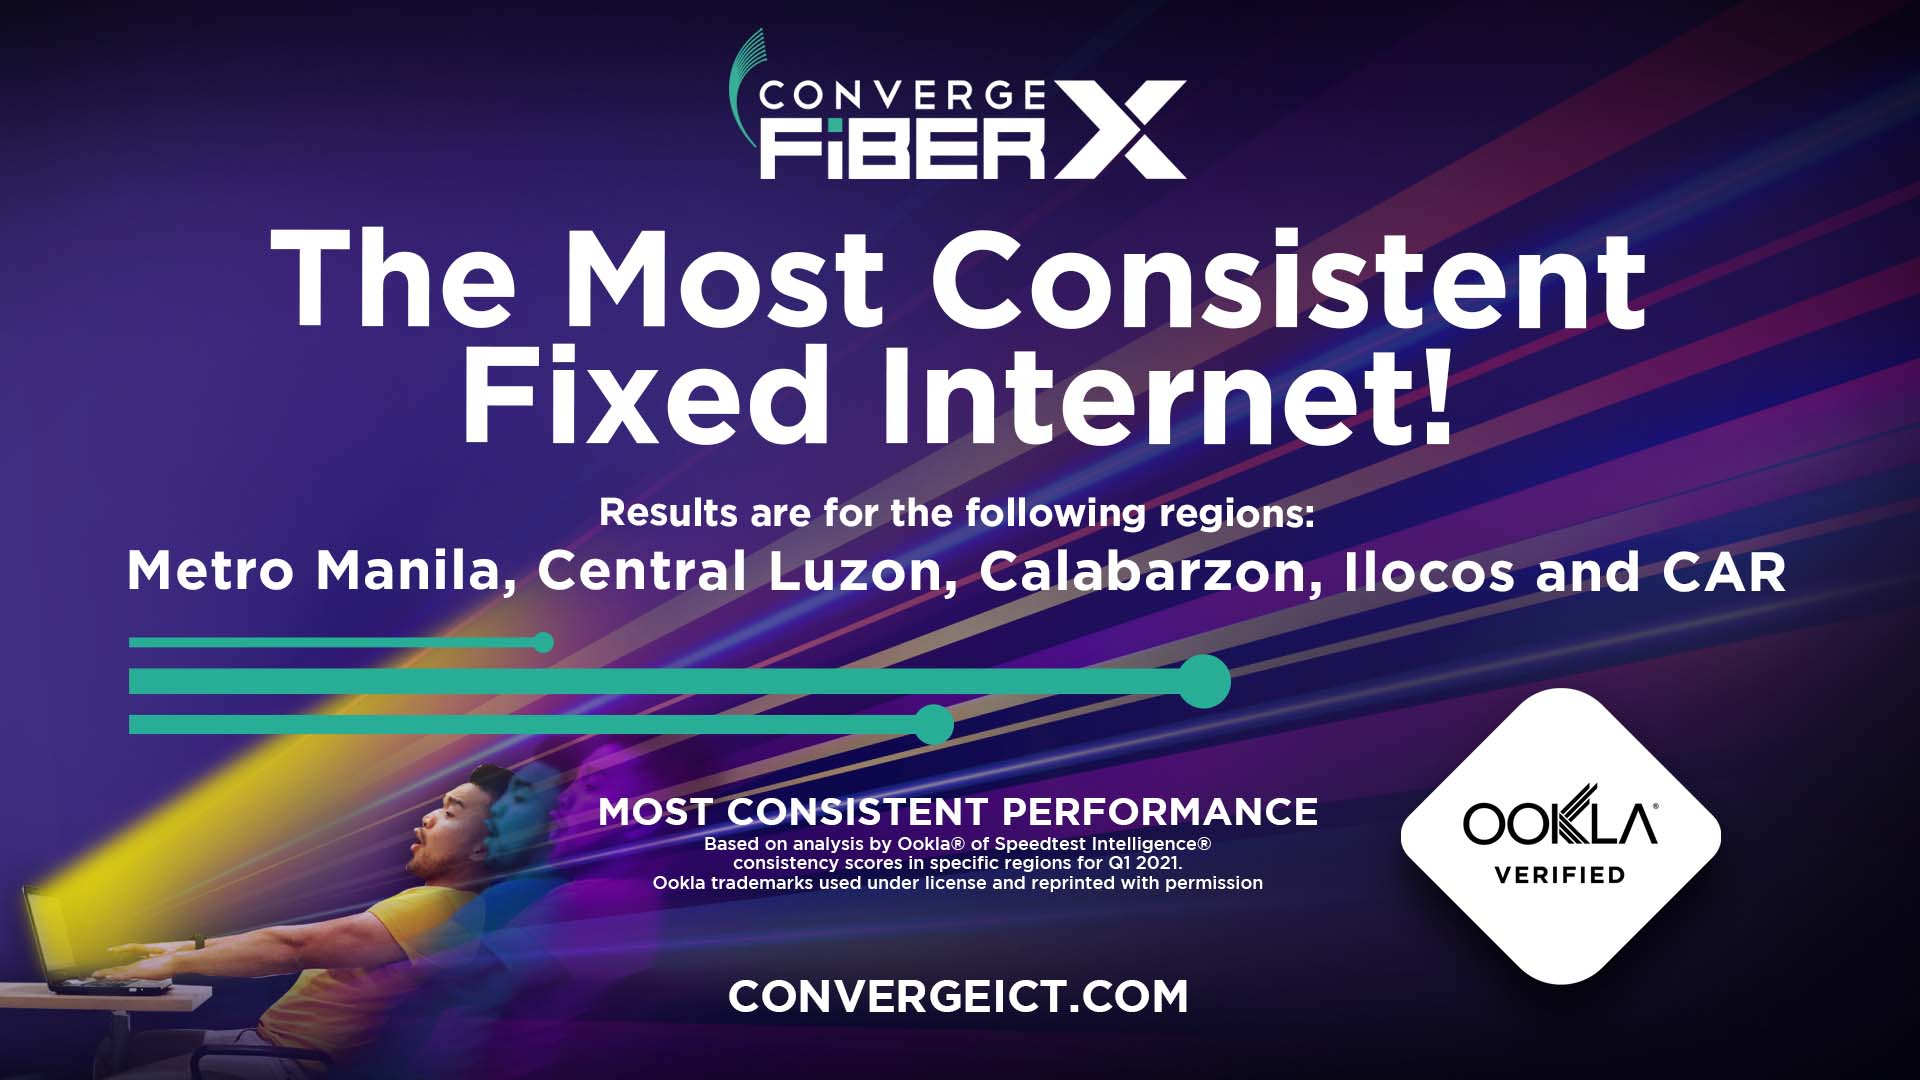 Converge ICT Delivers Most Consistent Fixed Internet in Five Regions, According to Ookla